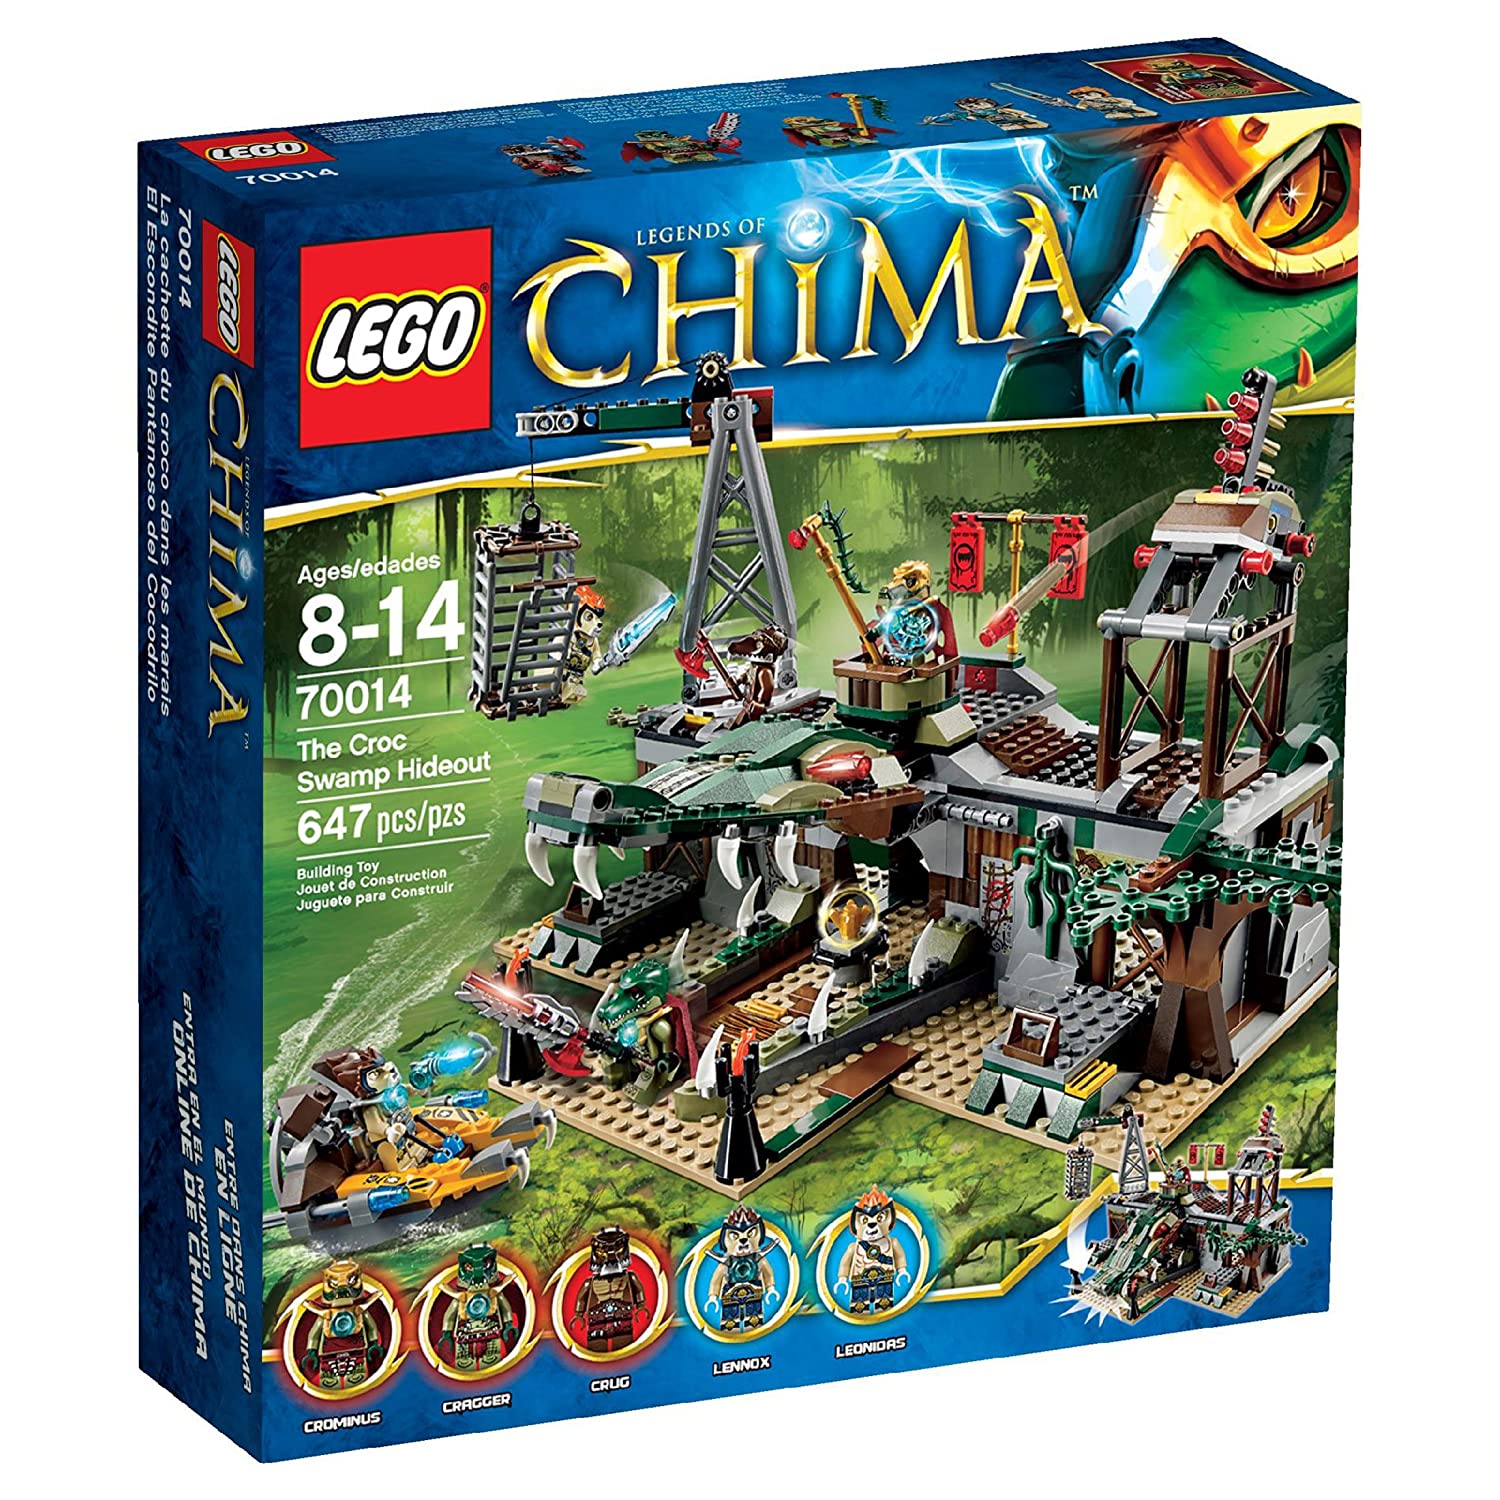 9 Best LEGO Chima Sets 2023 - Buying Guide & Reviews 1